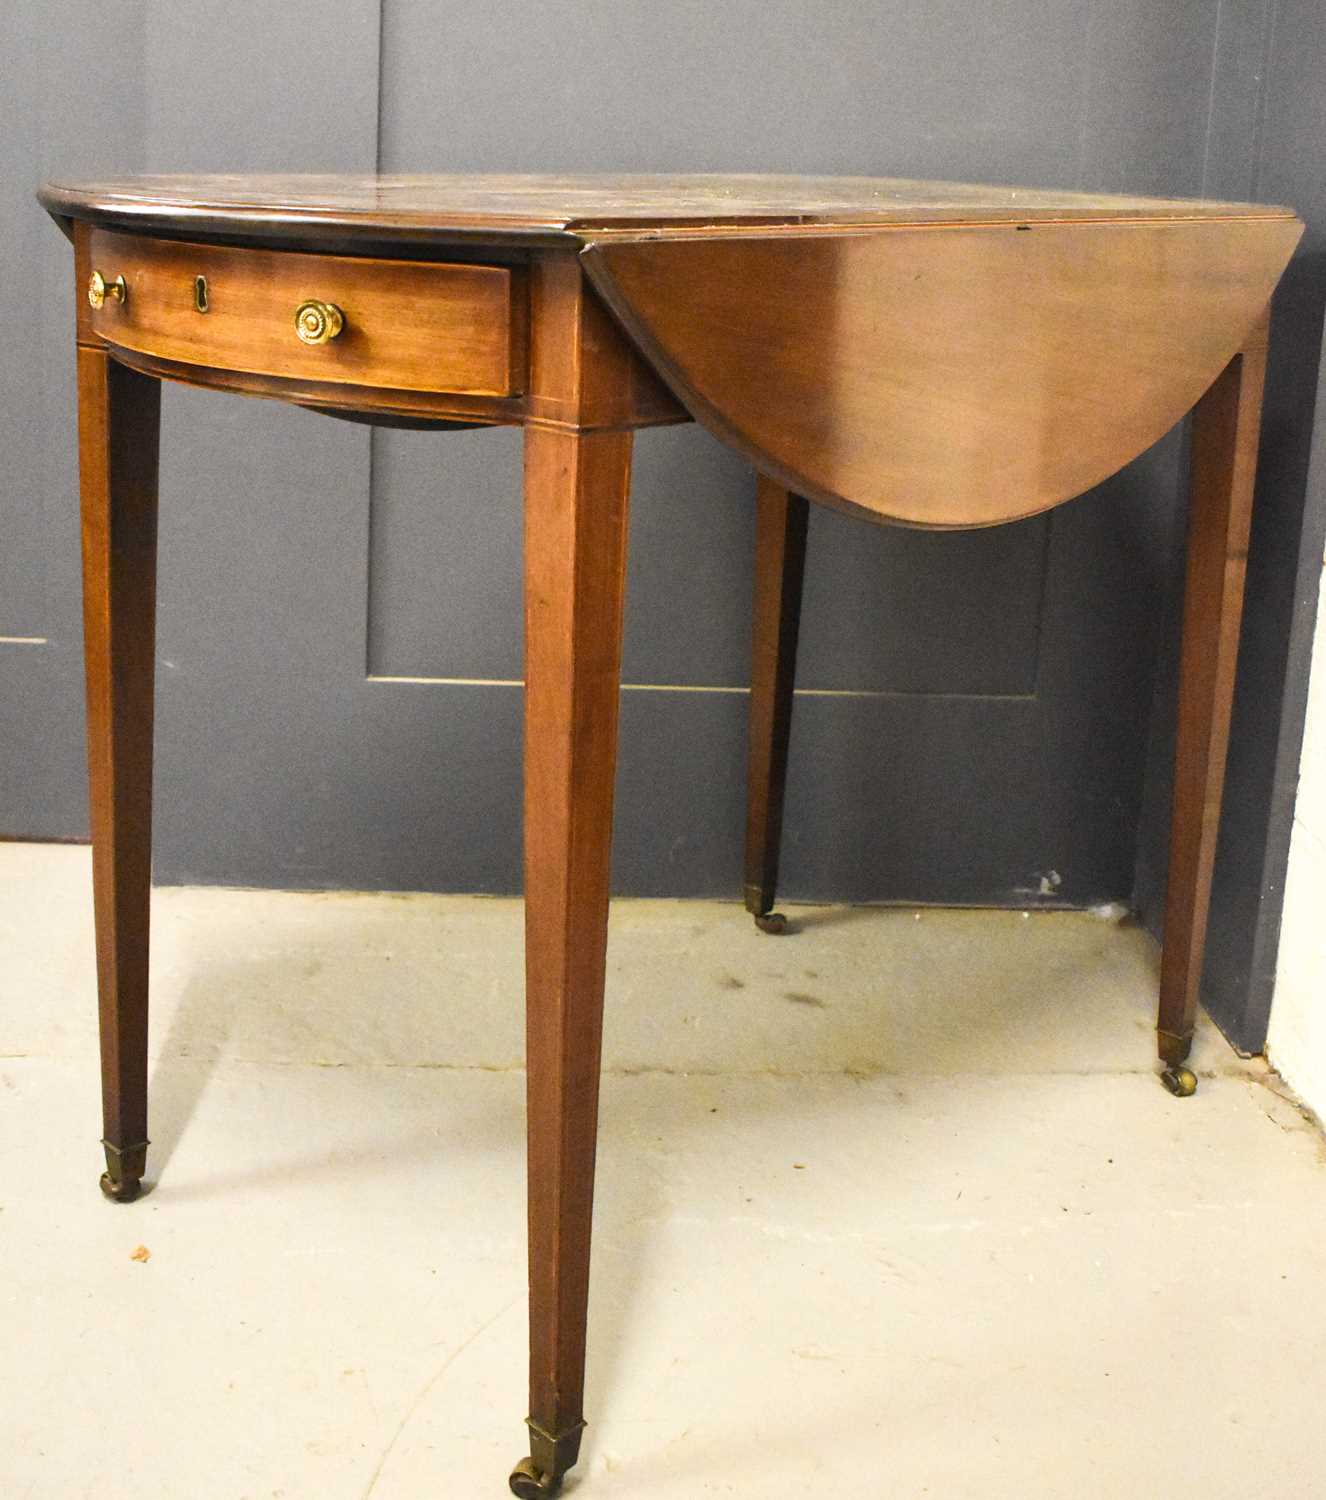 A 19th century mahogany Pembroke table with single drawer on sqaure tapered legs and brass - Image 2 of 2